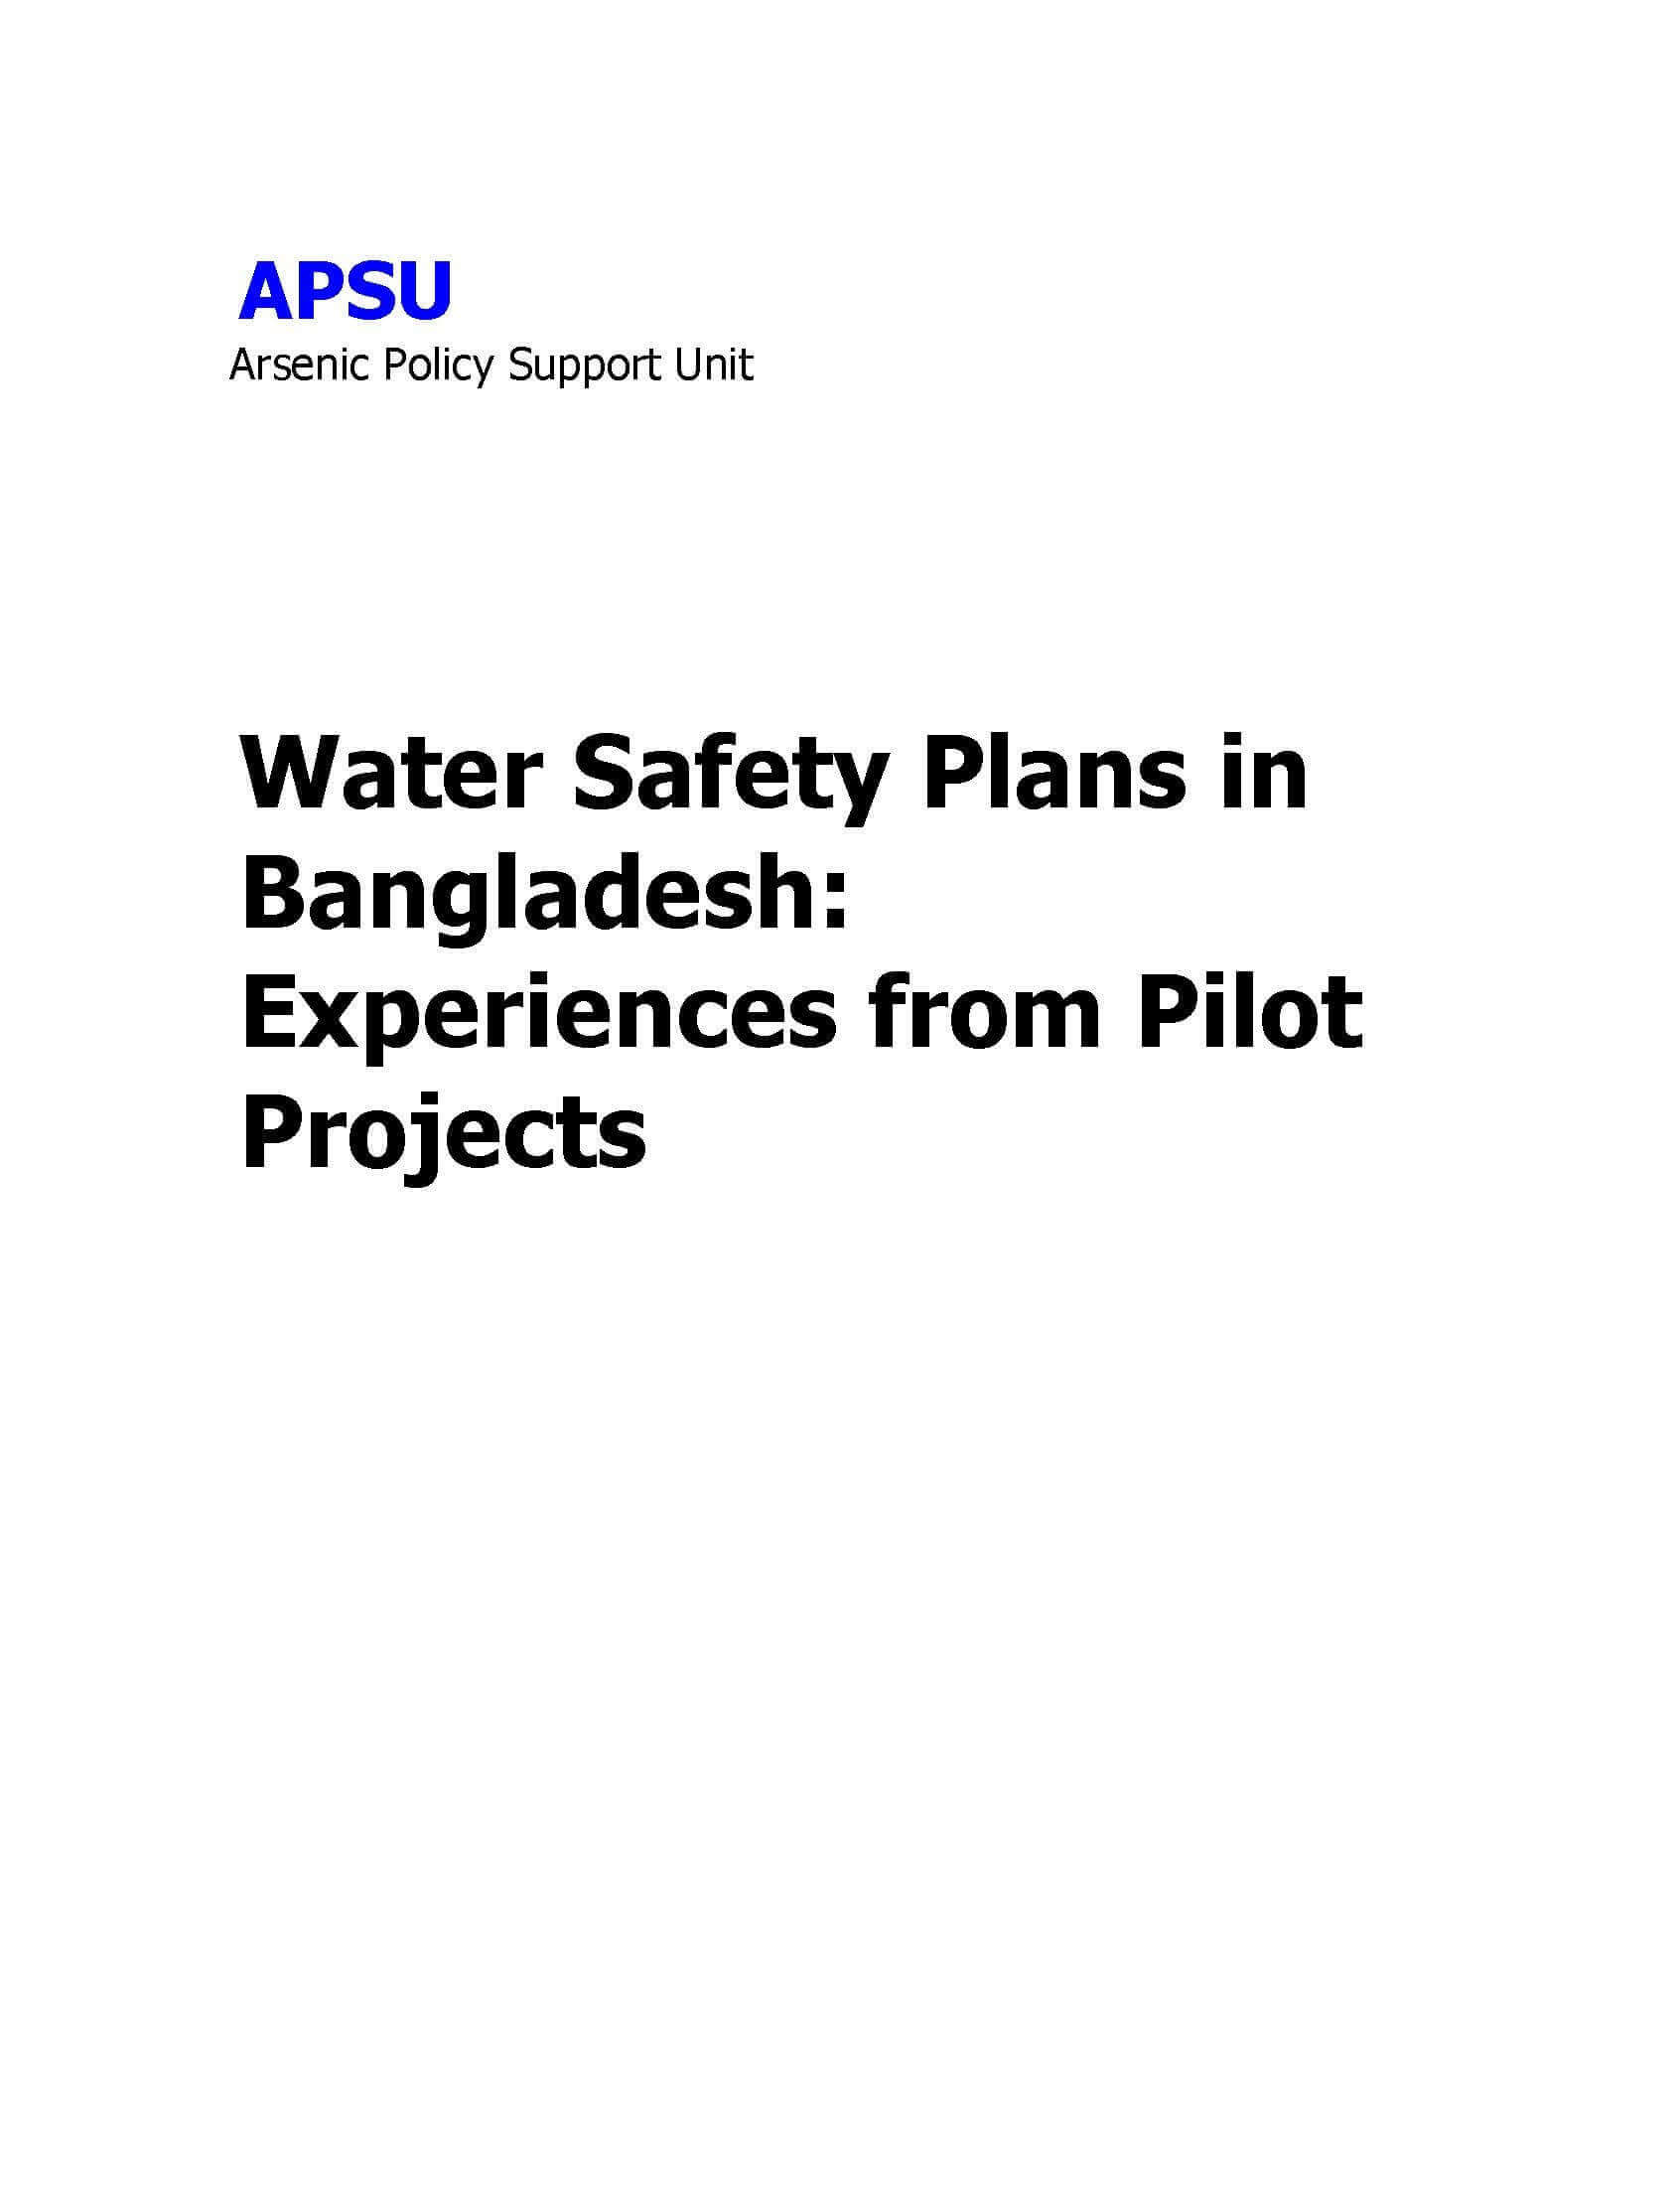 Water Safety Plans in Bangladesh: Experiences from Pilot Projects